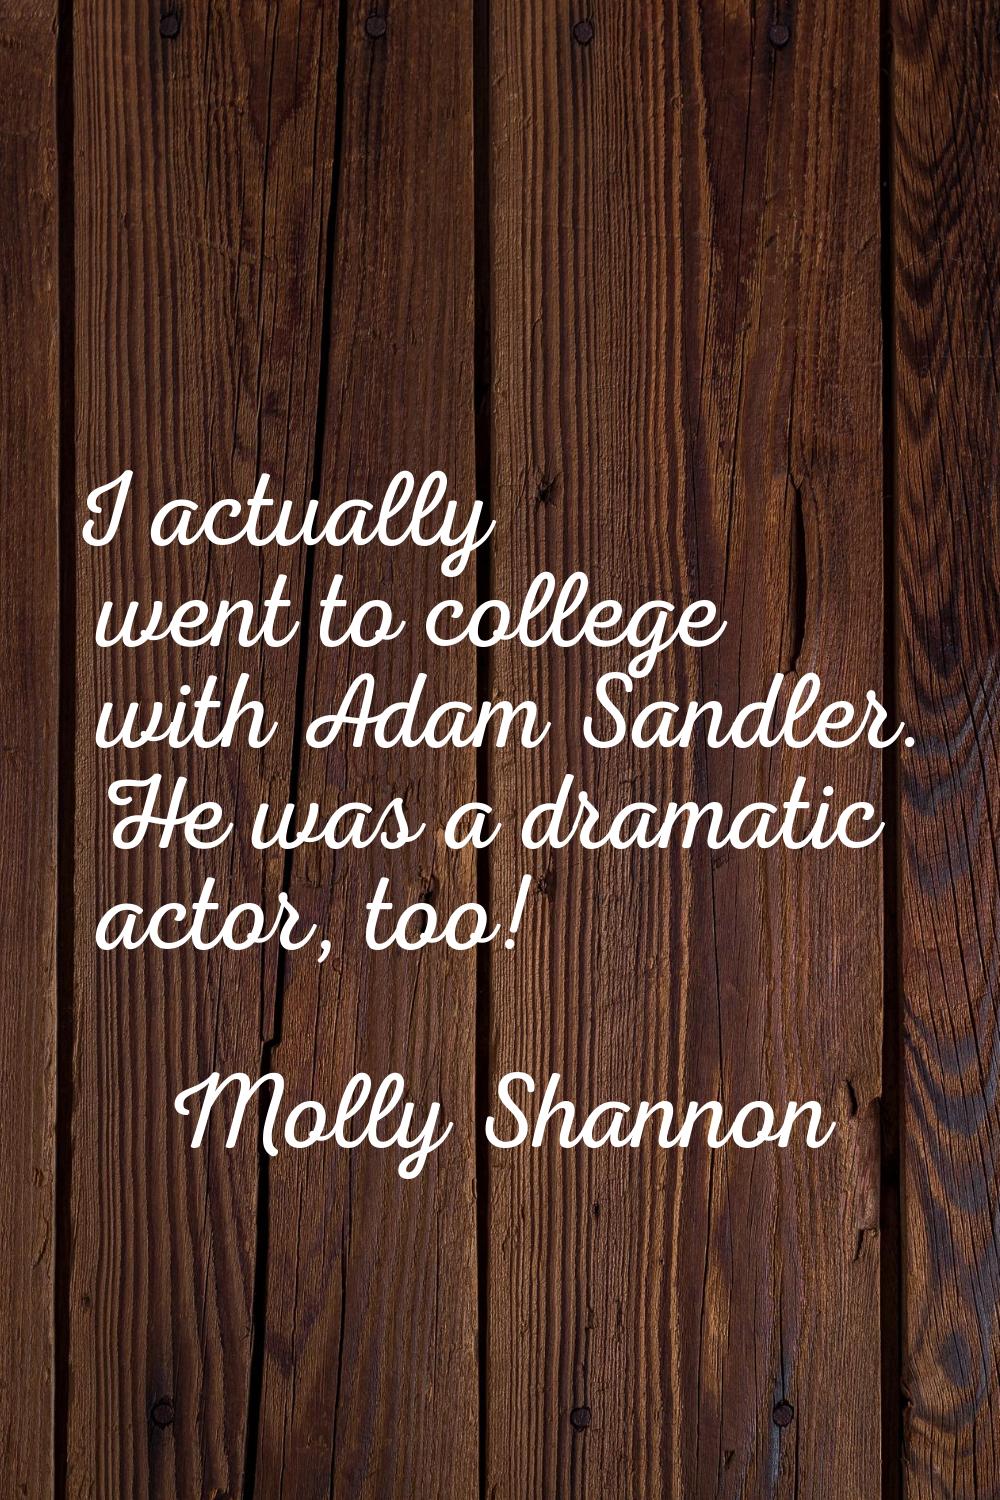 I actually went to college with Adam Sandler. He was a dramatic actor, too!